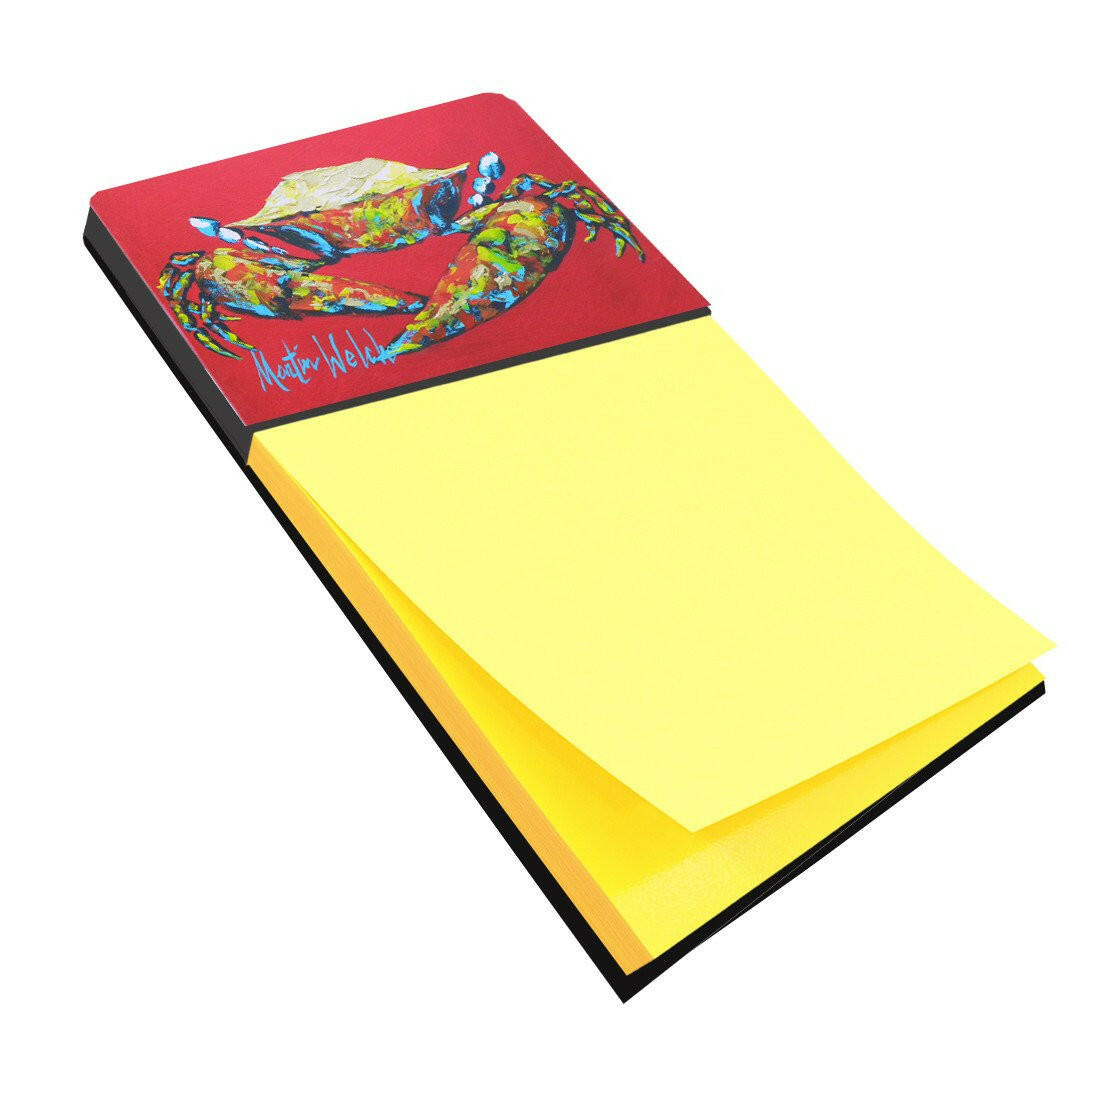 Crab Seafood One Refiillable Sticky Note Holder or Postit Note Dispenser MW1096SN by Caroline's Treasures